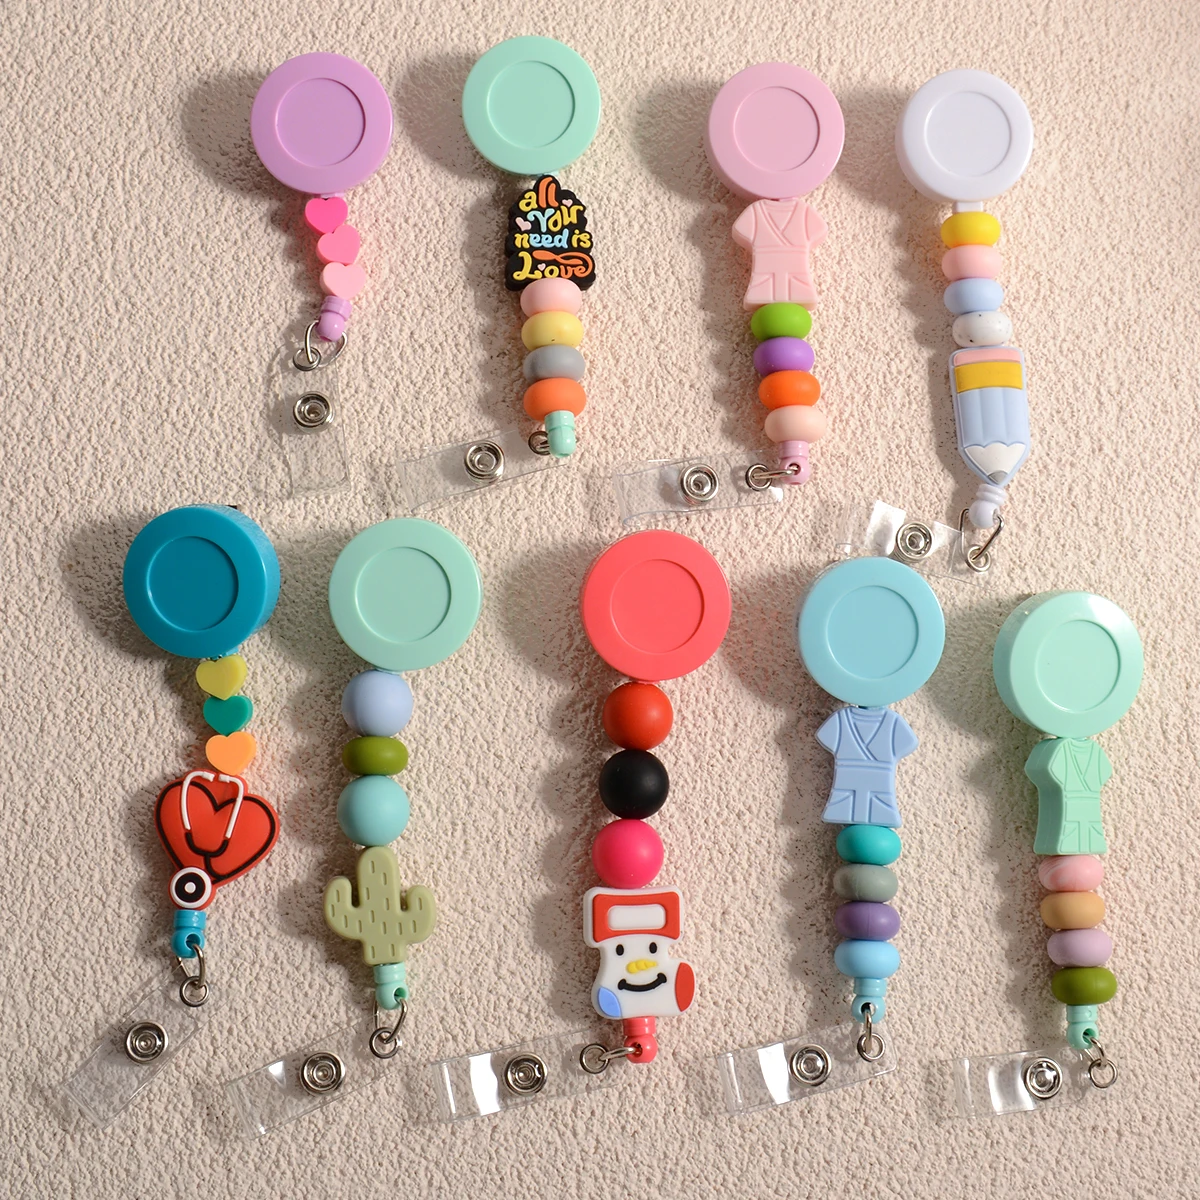 Retractable Silicone Beads Badge Reels BBS Cute Heart Nurse Id Badge Holders with Alligator CliP for Nursing Teachers Office 1pcs hospital retractable badge reel with belt clip cute cartoon cat nurse doctor name tag card holder accessories office supply